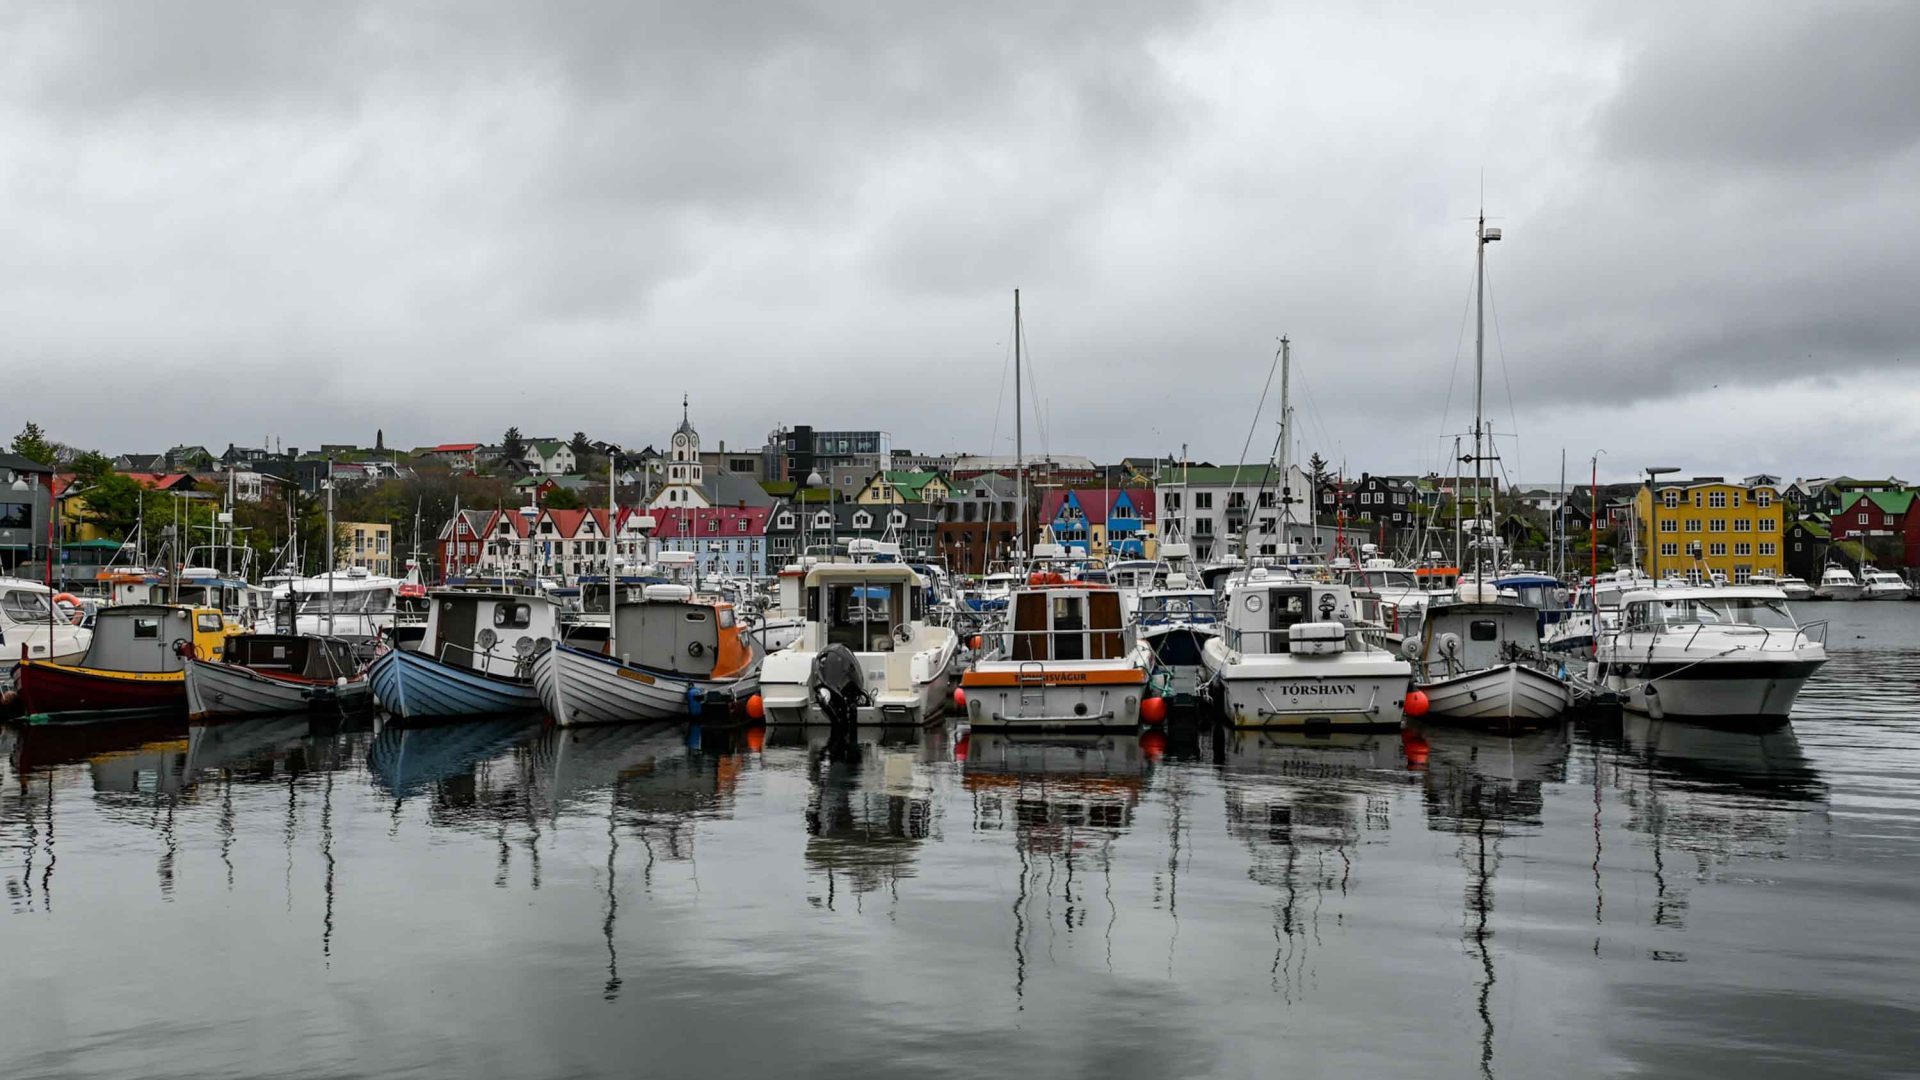 Boats in the water at Torshavn.